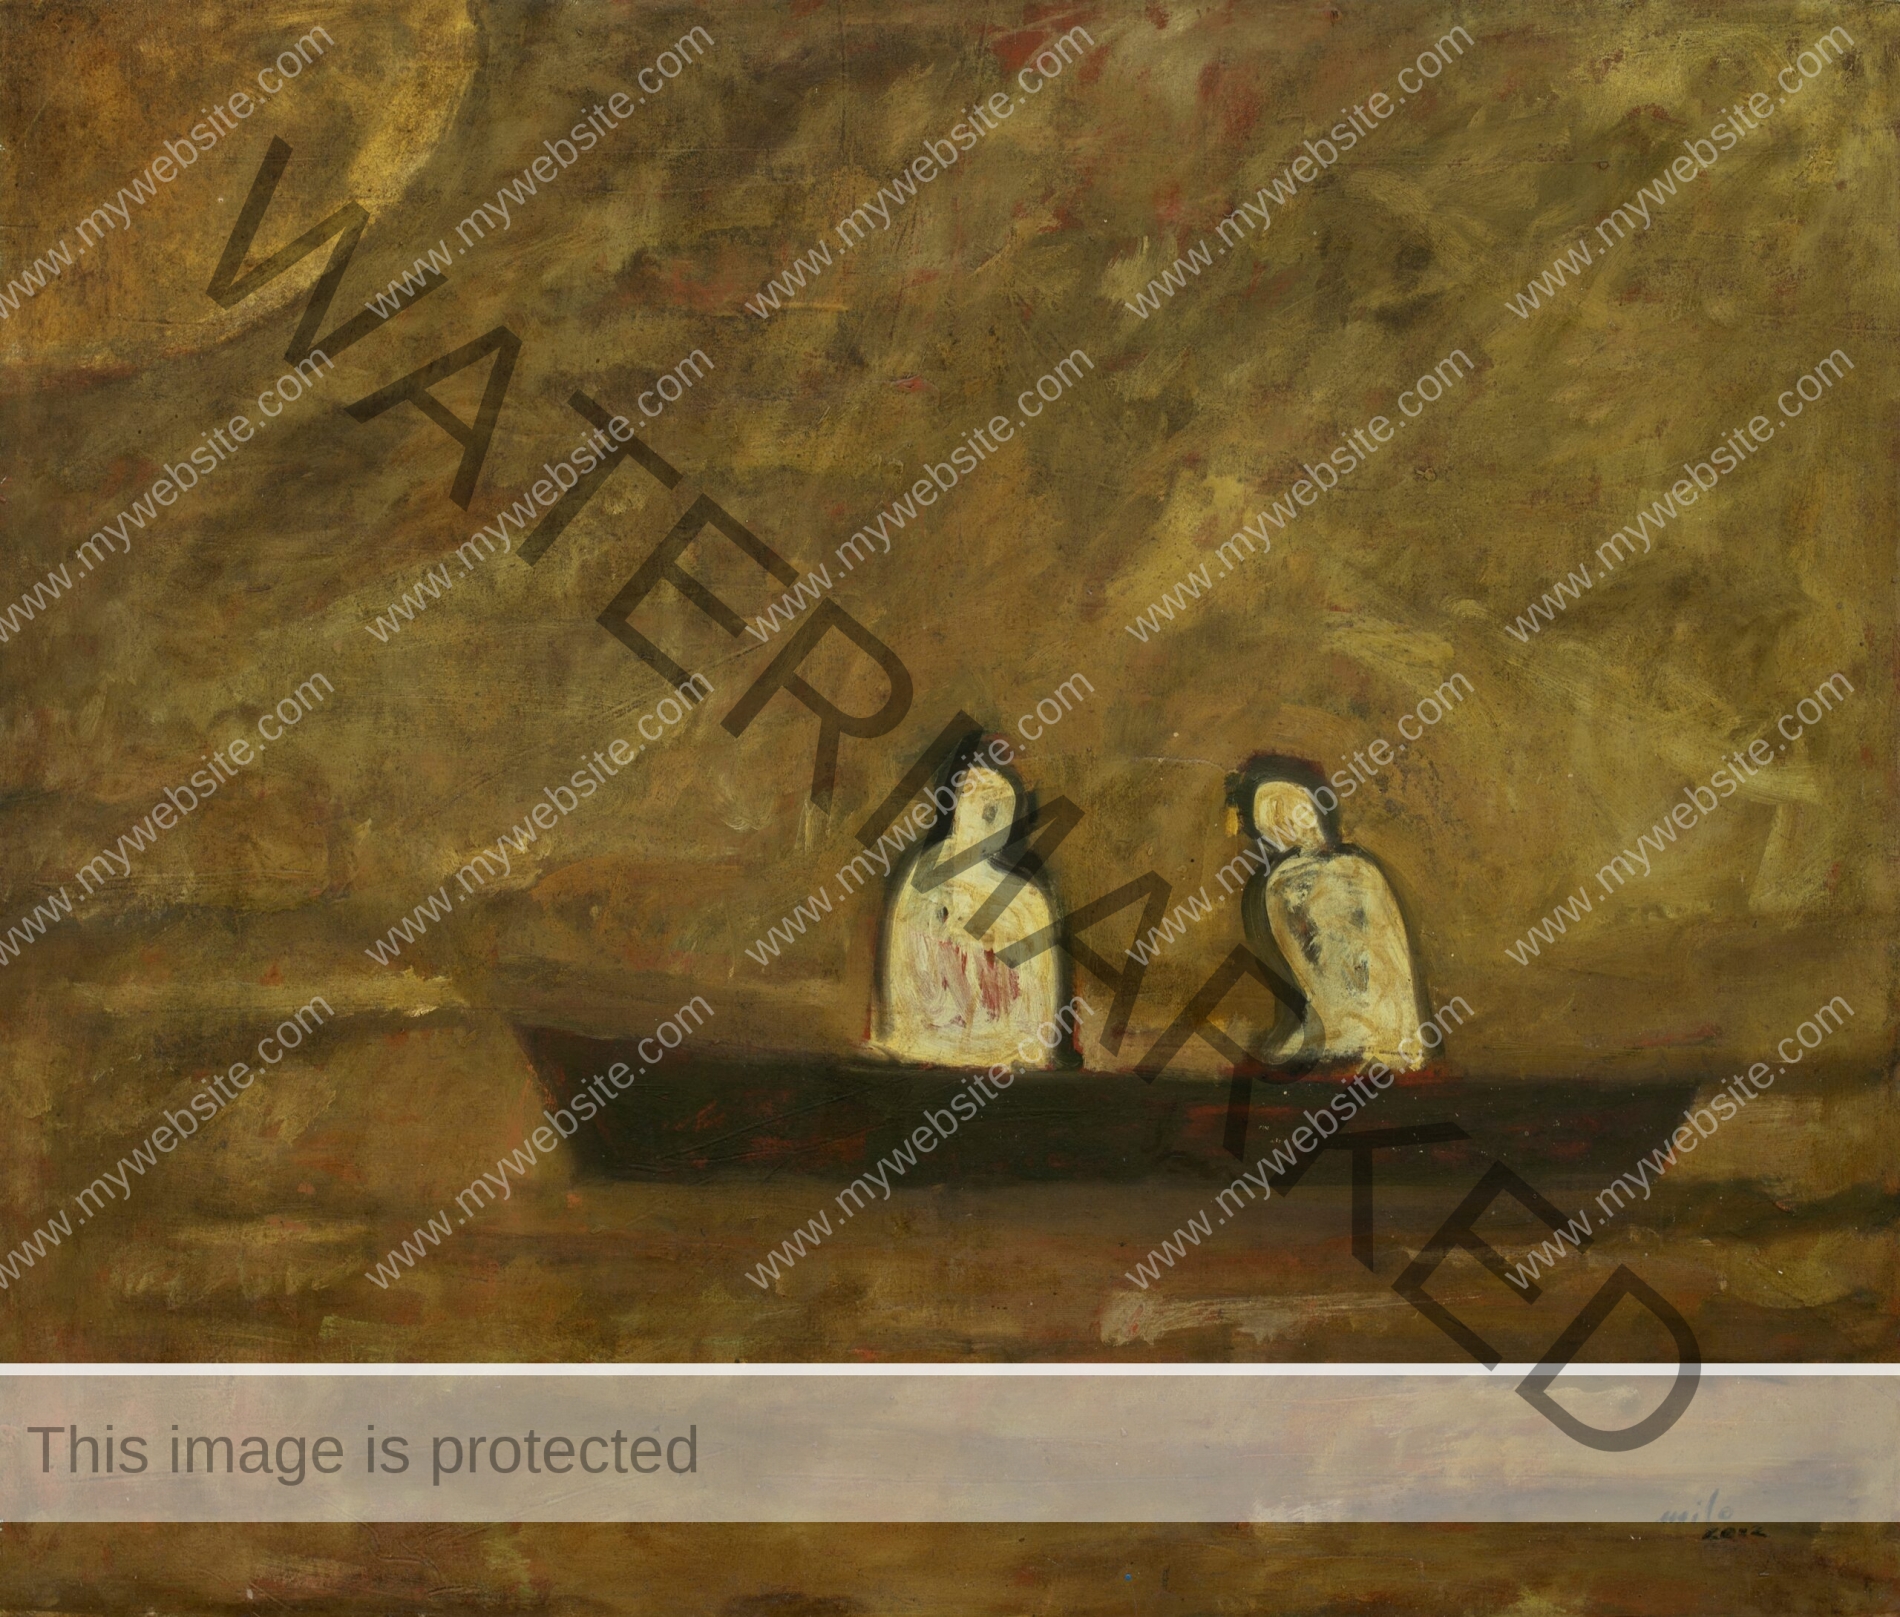 muted abstract painting called "El Silencio" by Milo Gonzalez, featuring two figures in a solitary small boat amidst an abstract background of yellow/brown tones.